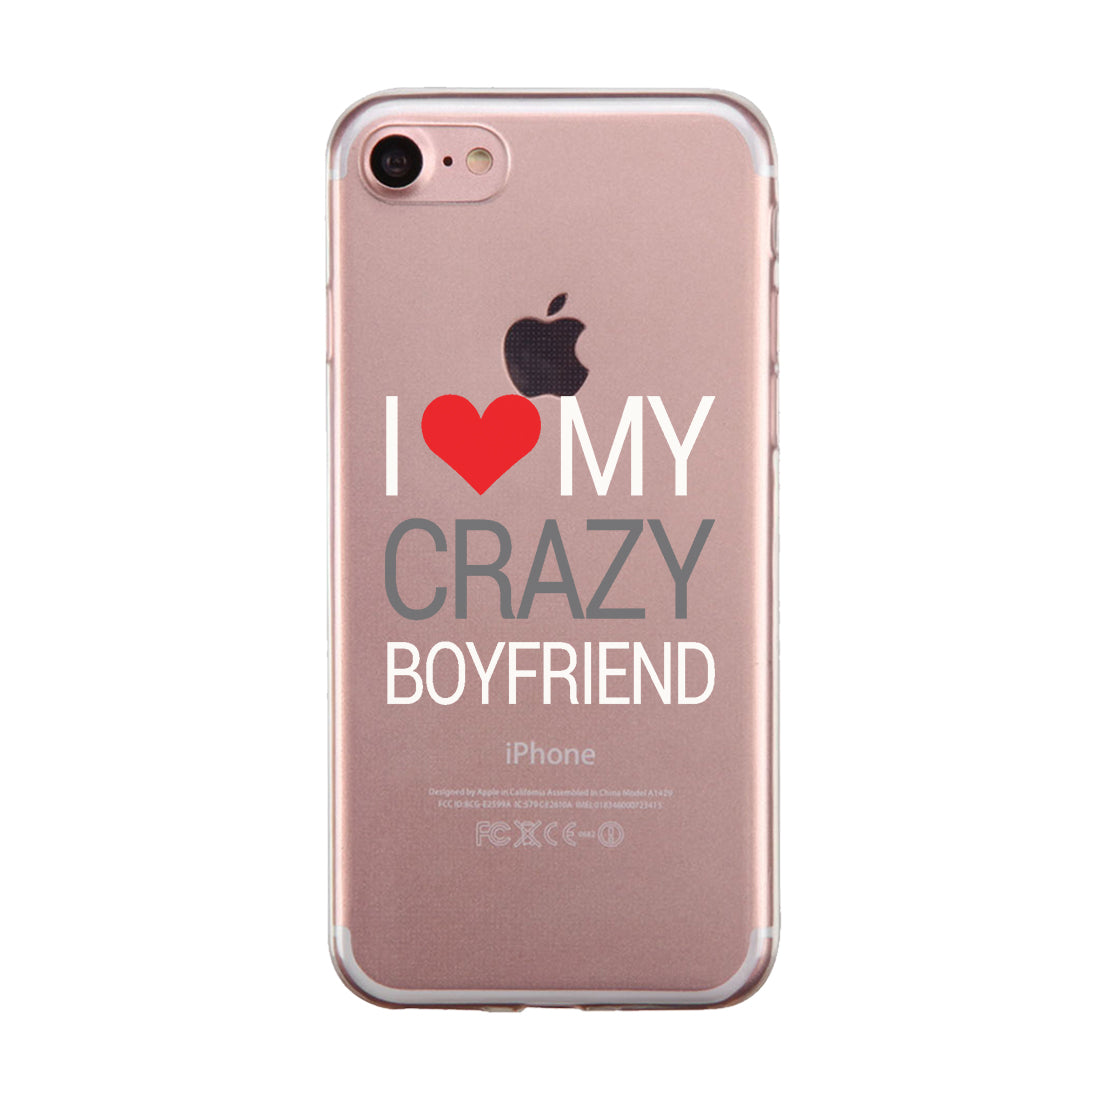 Boyfriend Gift Ideas Phone Cases - iPhone and Android